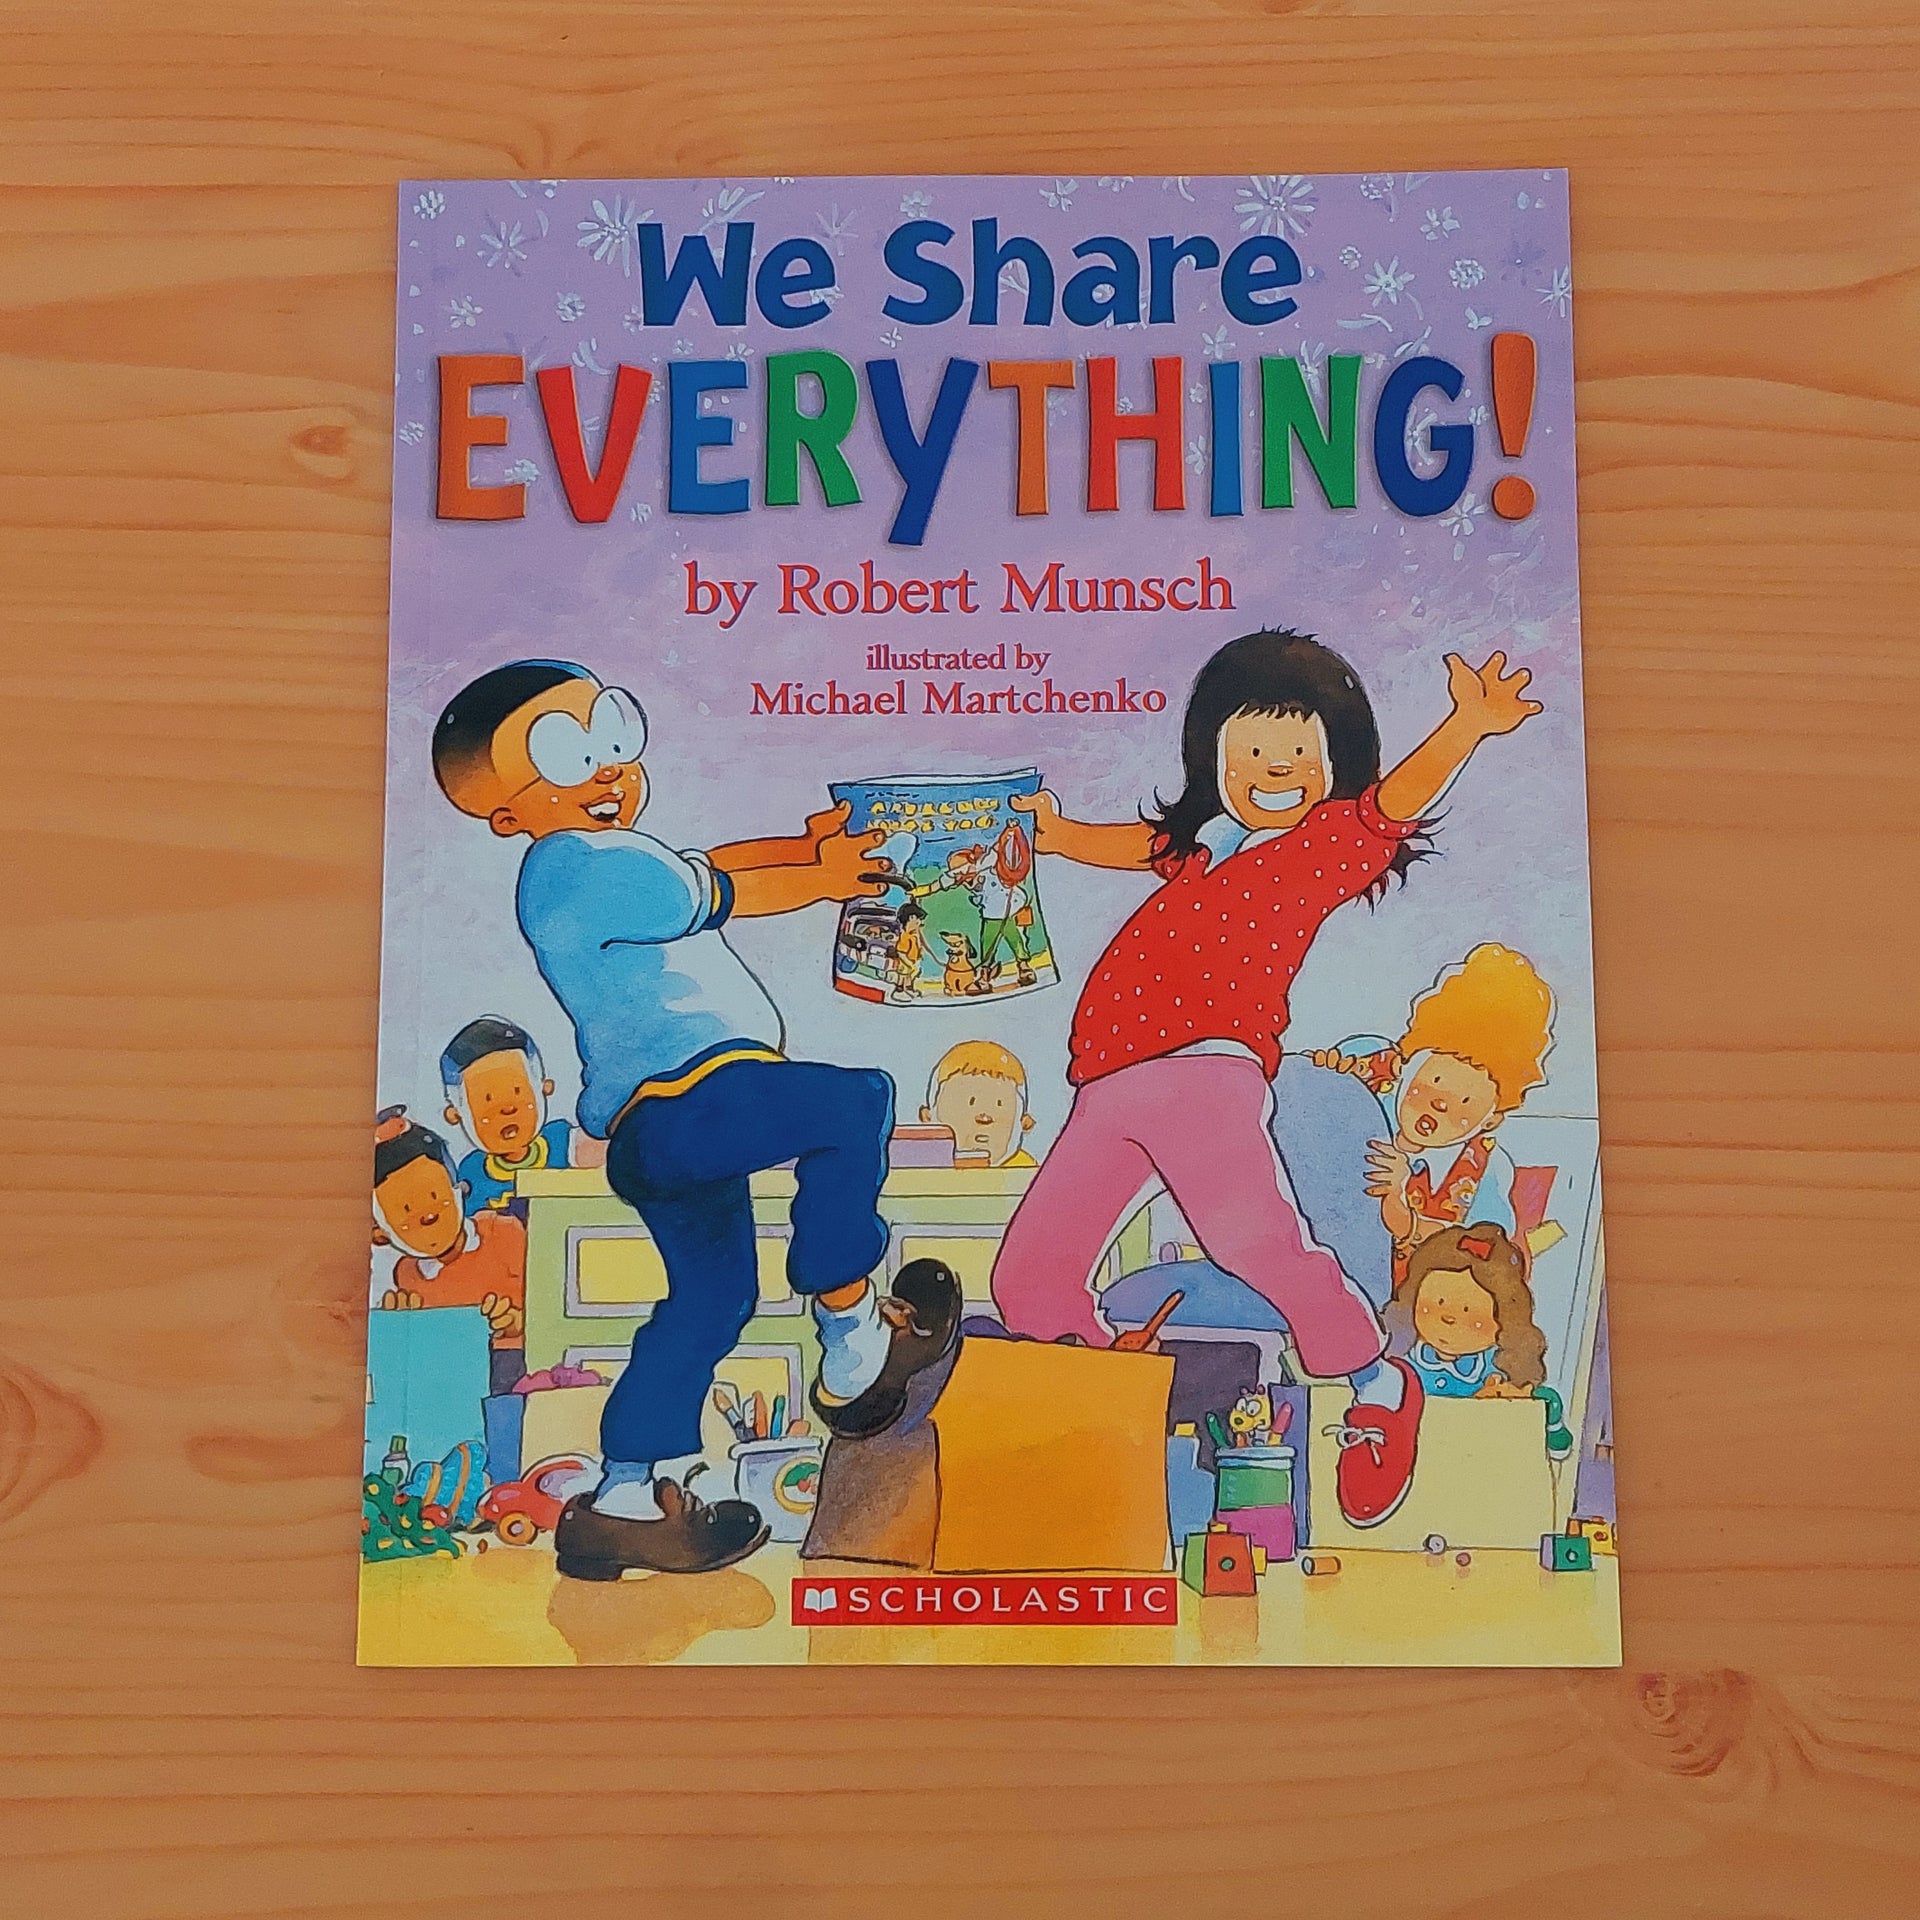 We Share Everything! by Robert Munsch – Childhood Ink